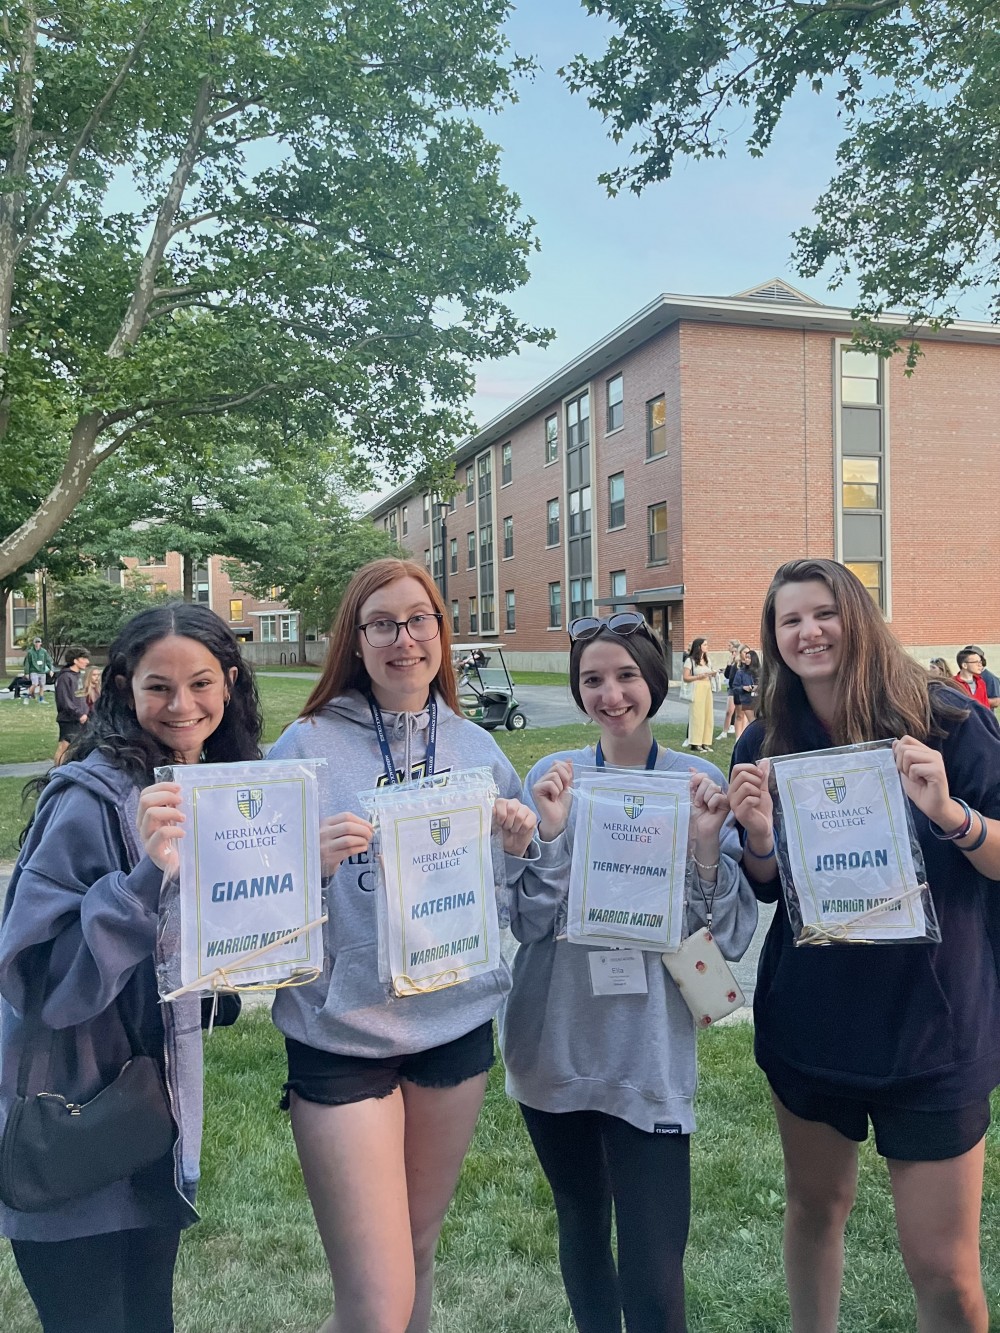 Gianna, Katerina, Ella, and Jordan with their personalized banners at Merrimack College orientation on 6/20/22!